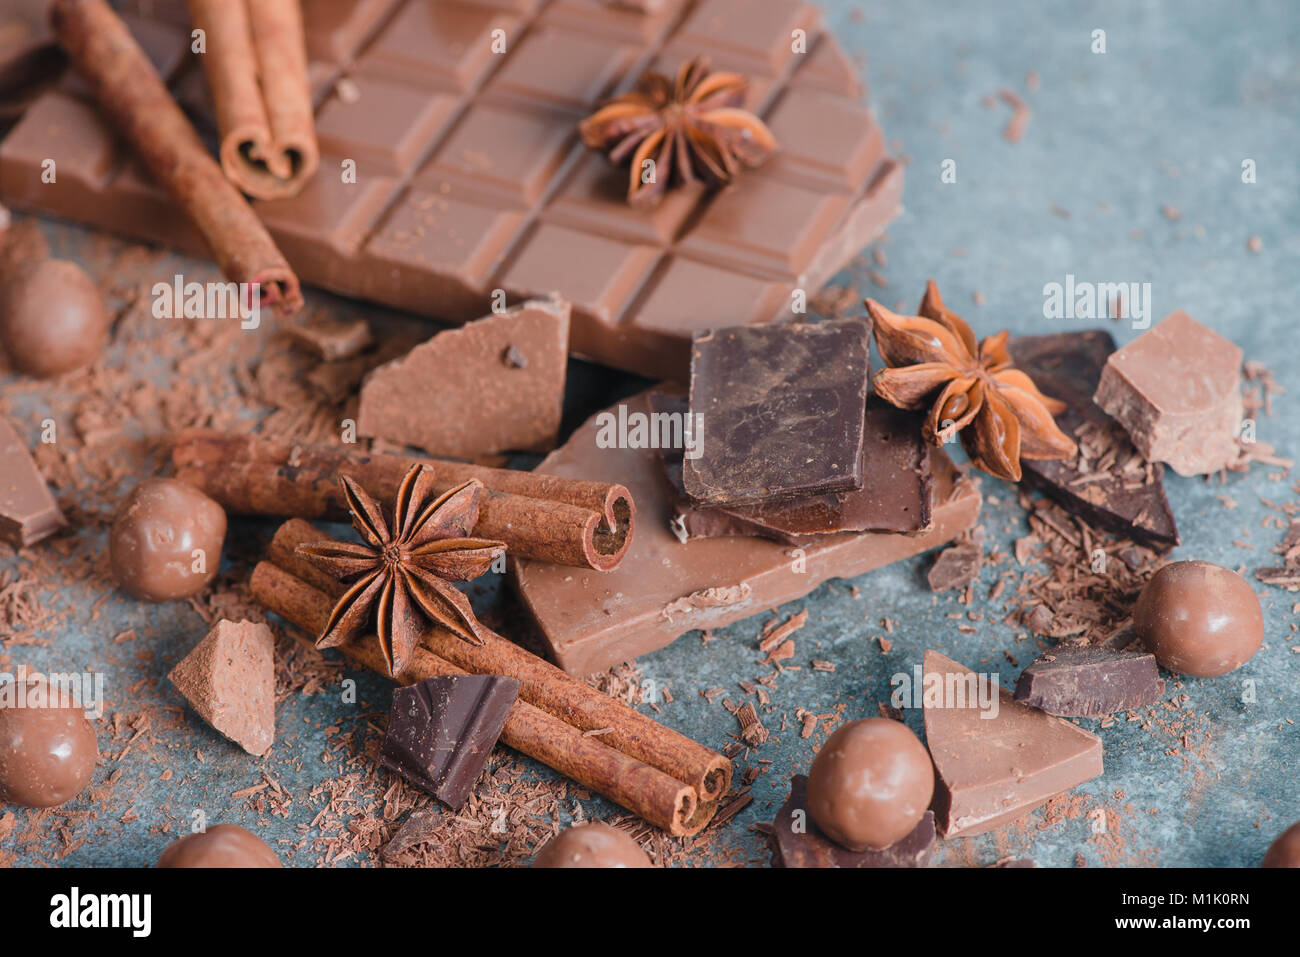 Dessert ingredients close-up. Chocolate pieces with spices and scattered cocoa on a stone background. Confectionery food photography. Stock Photo